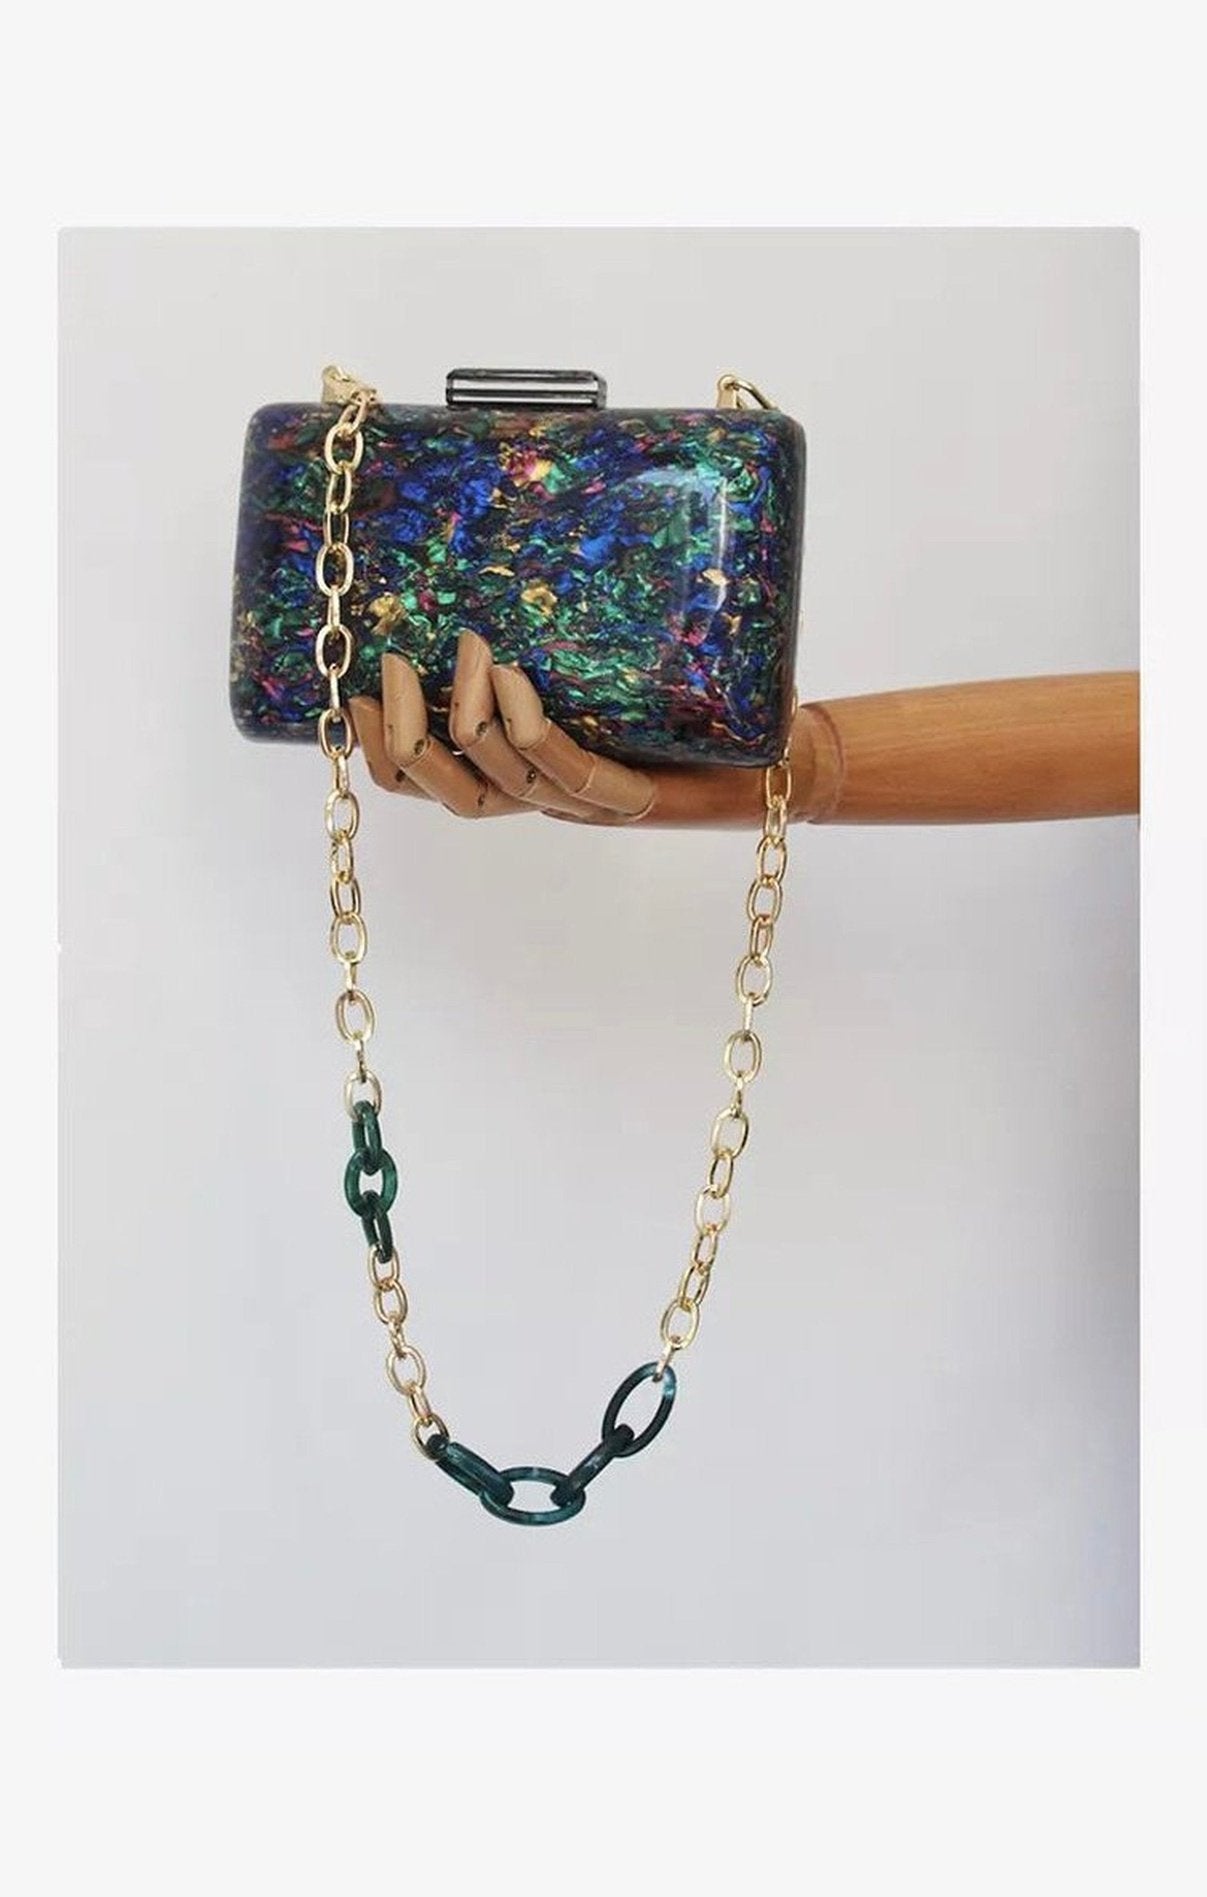 Colorful marble bag